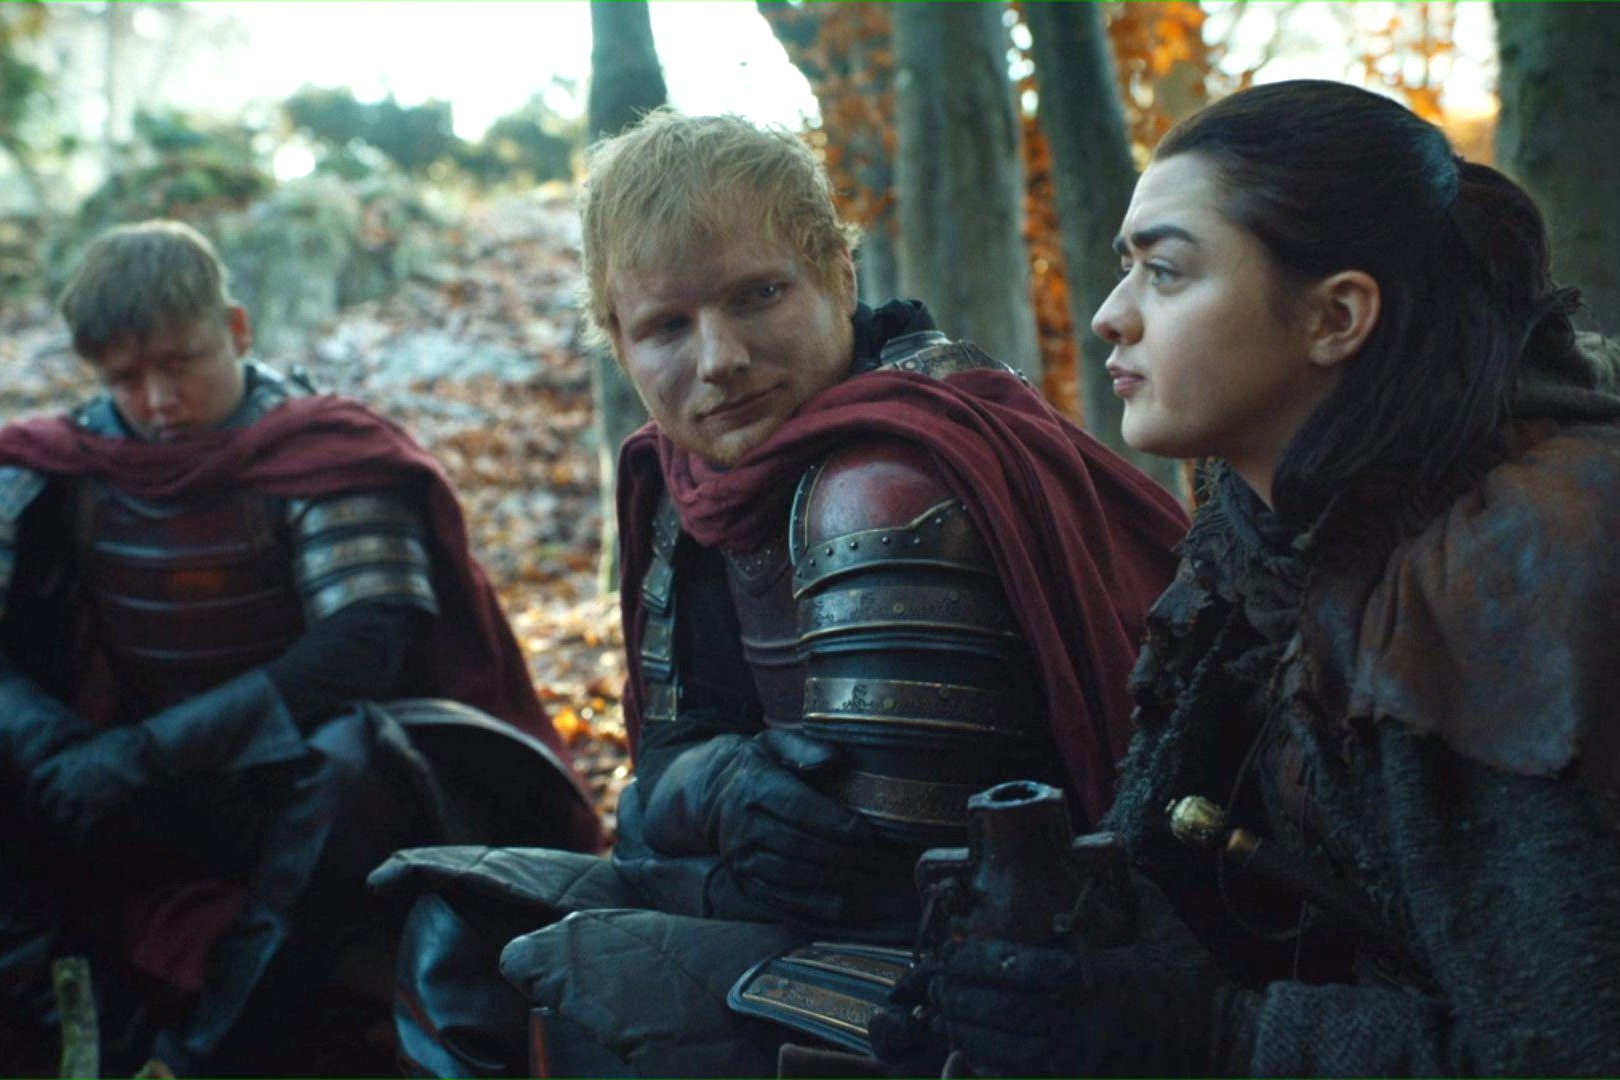 Fans Outraged By Ed Sheeran’s Game Of Thrones Performance